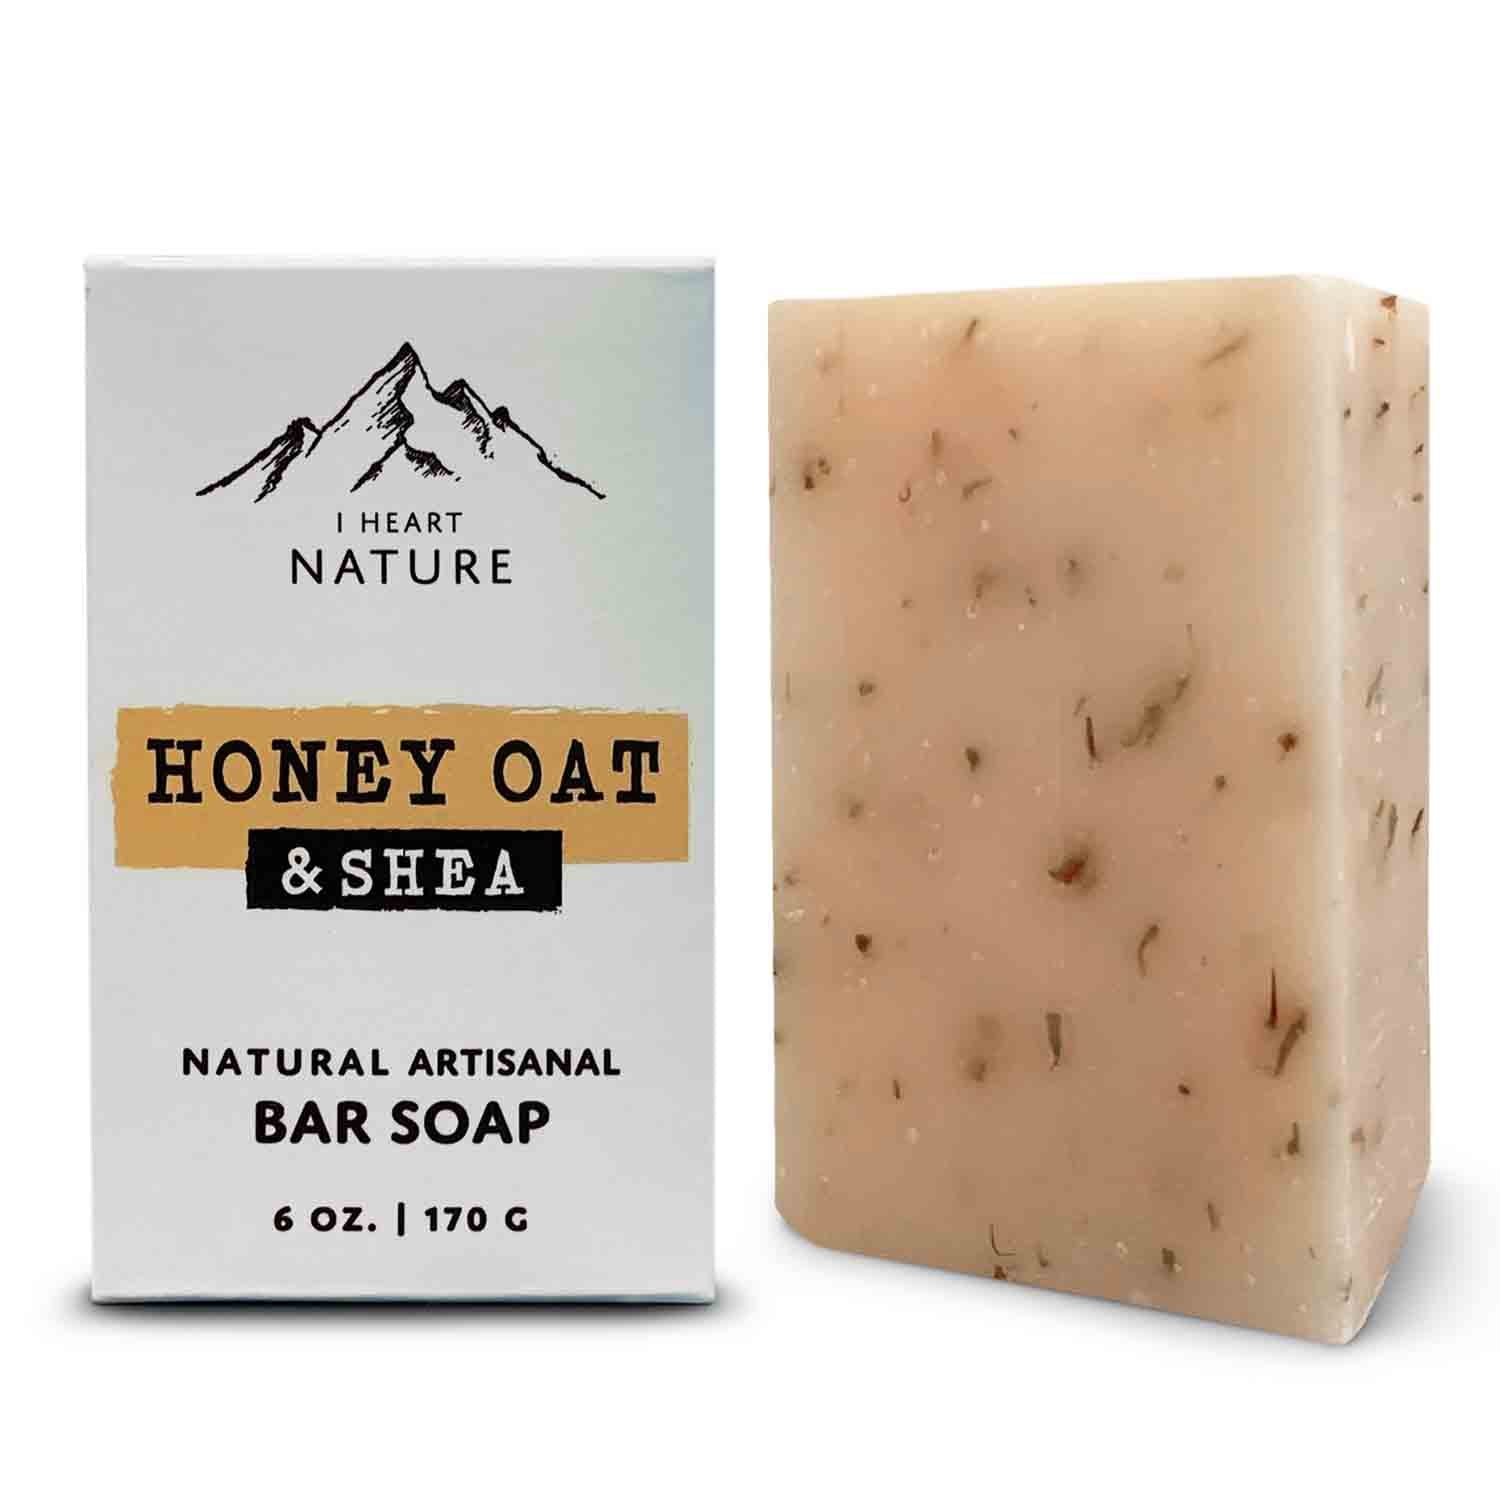 Honey Oat & Shea Butter Soap - Rich Creamy Lather, Nourishing and Gentle for All Skin Types